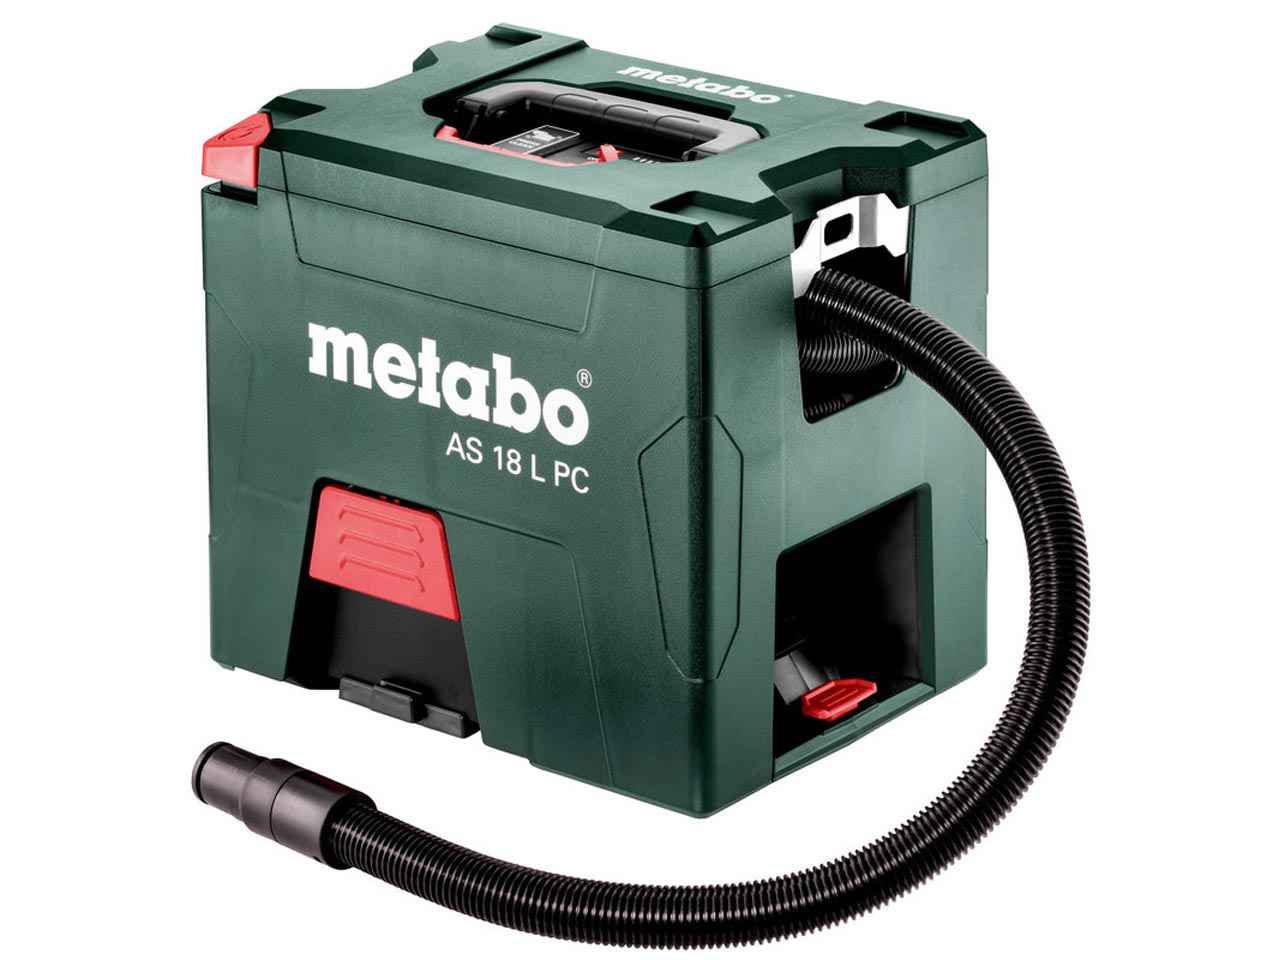 metabo-18v-vacuum-cleaner-cordless-bare-tool-only-collier-miller